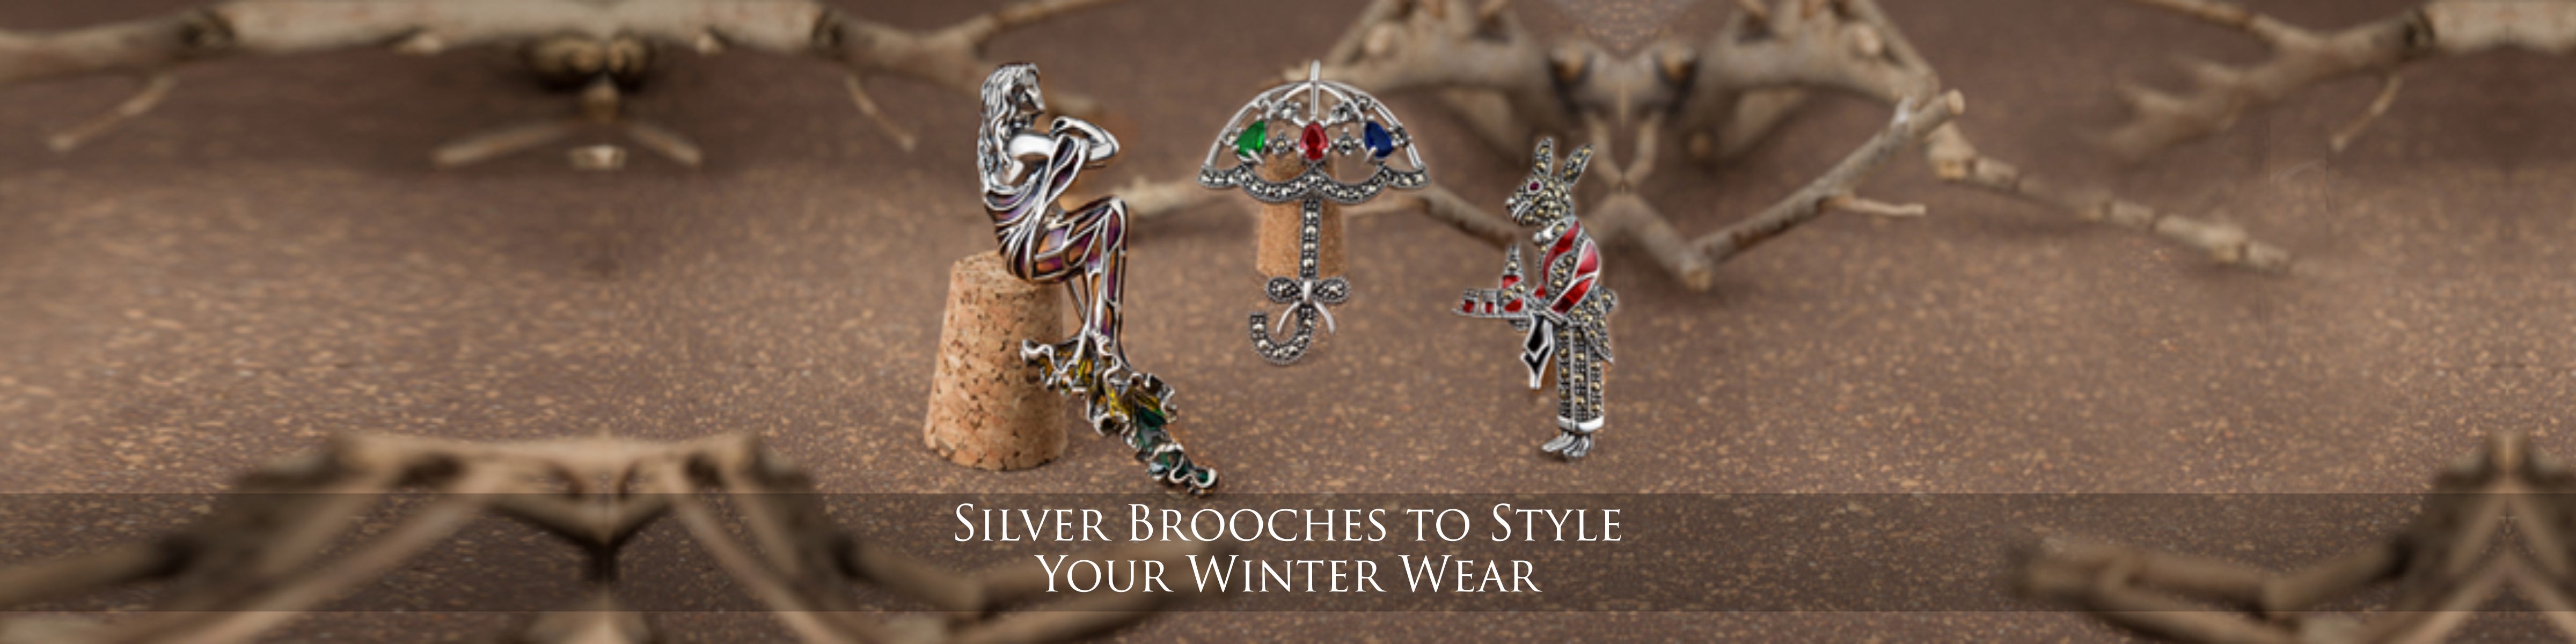 Silver Brooches to Style Your Winter Wear